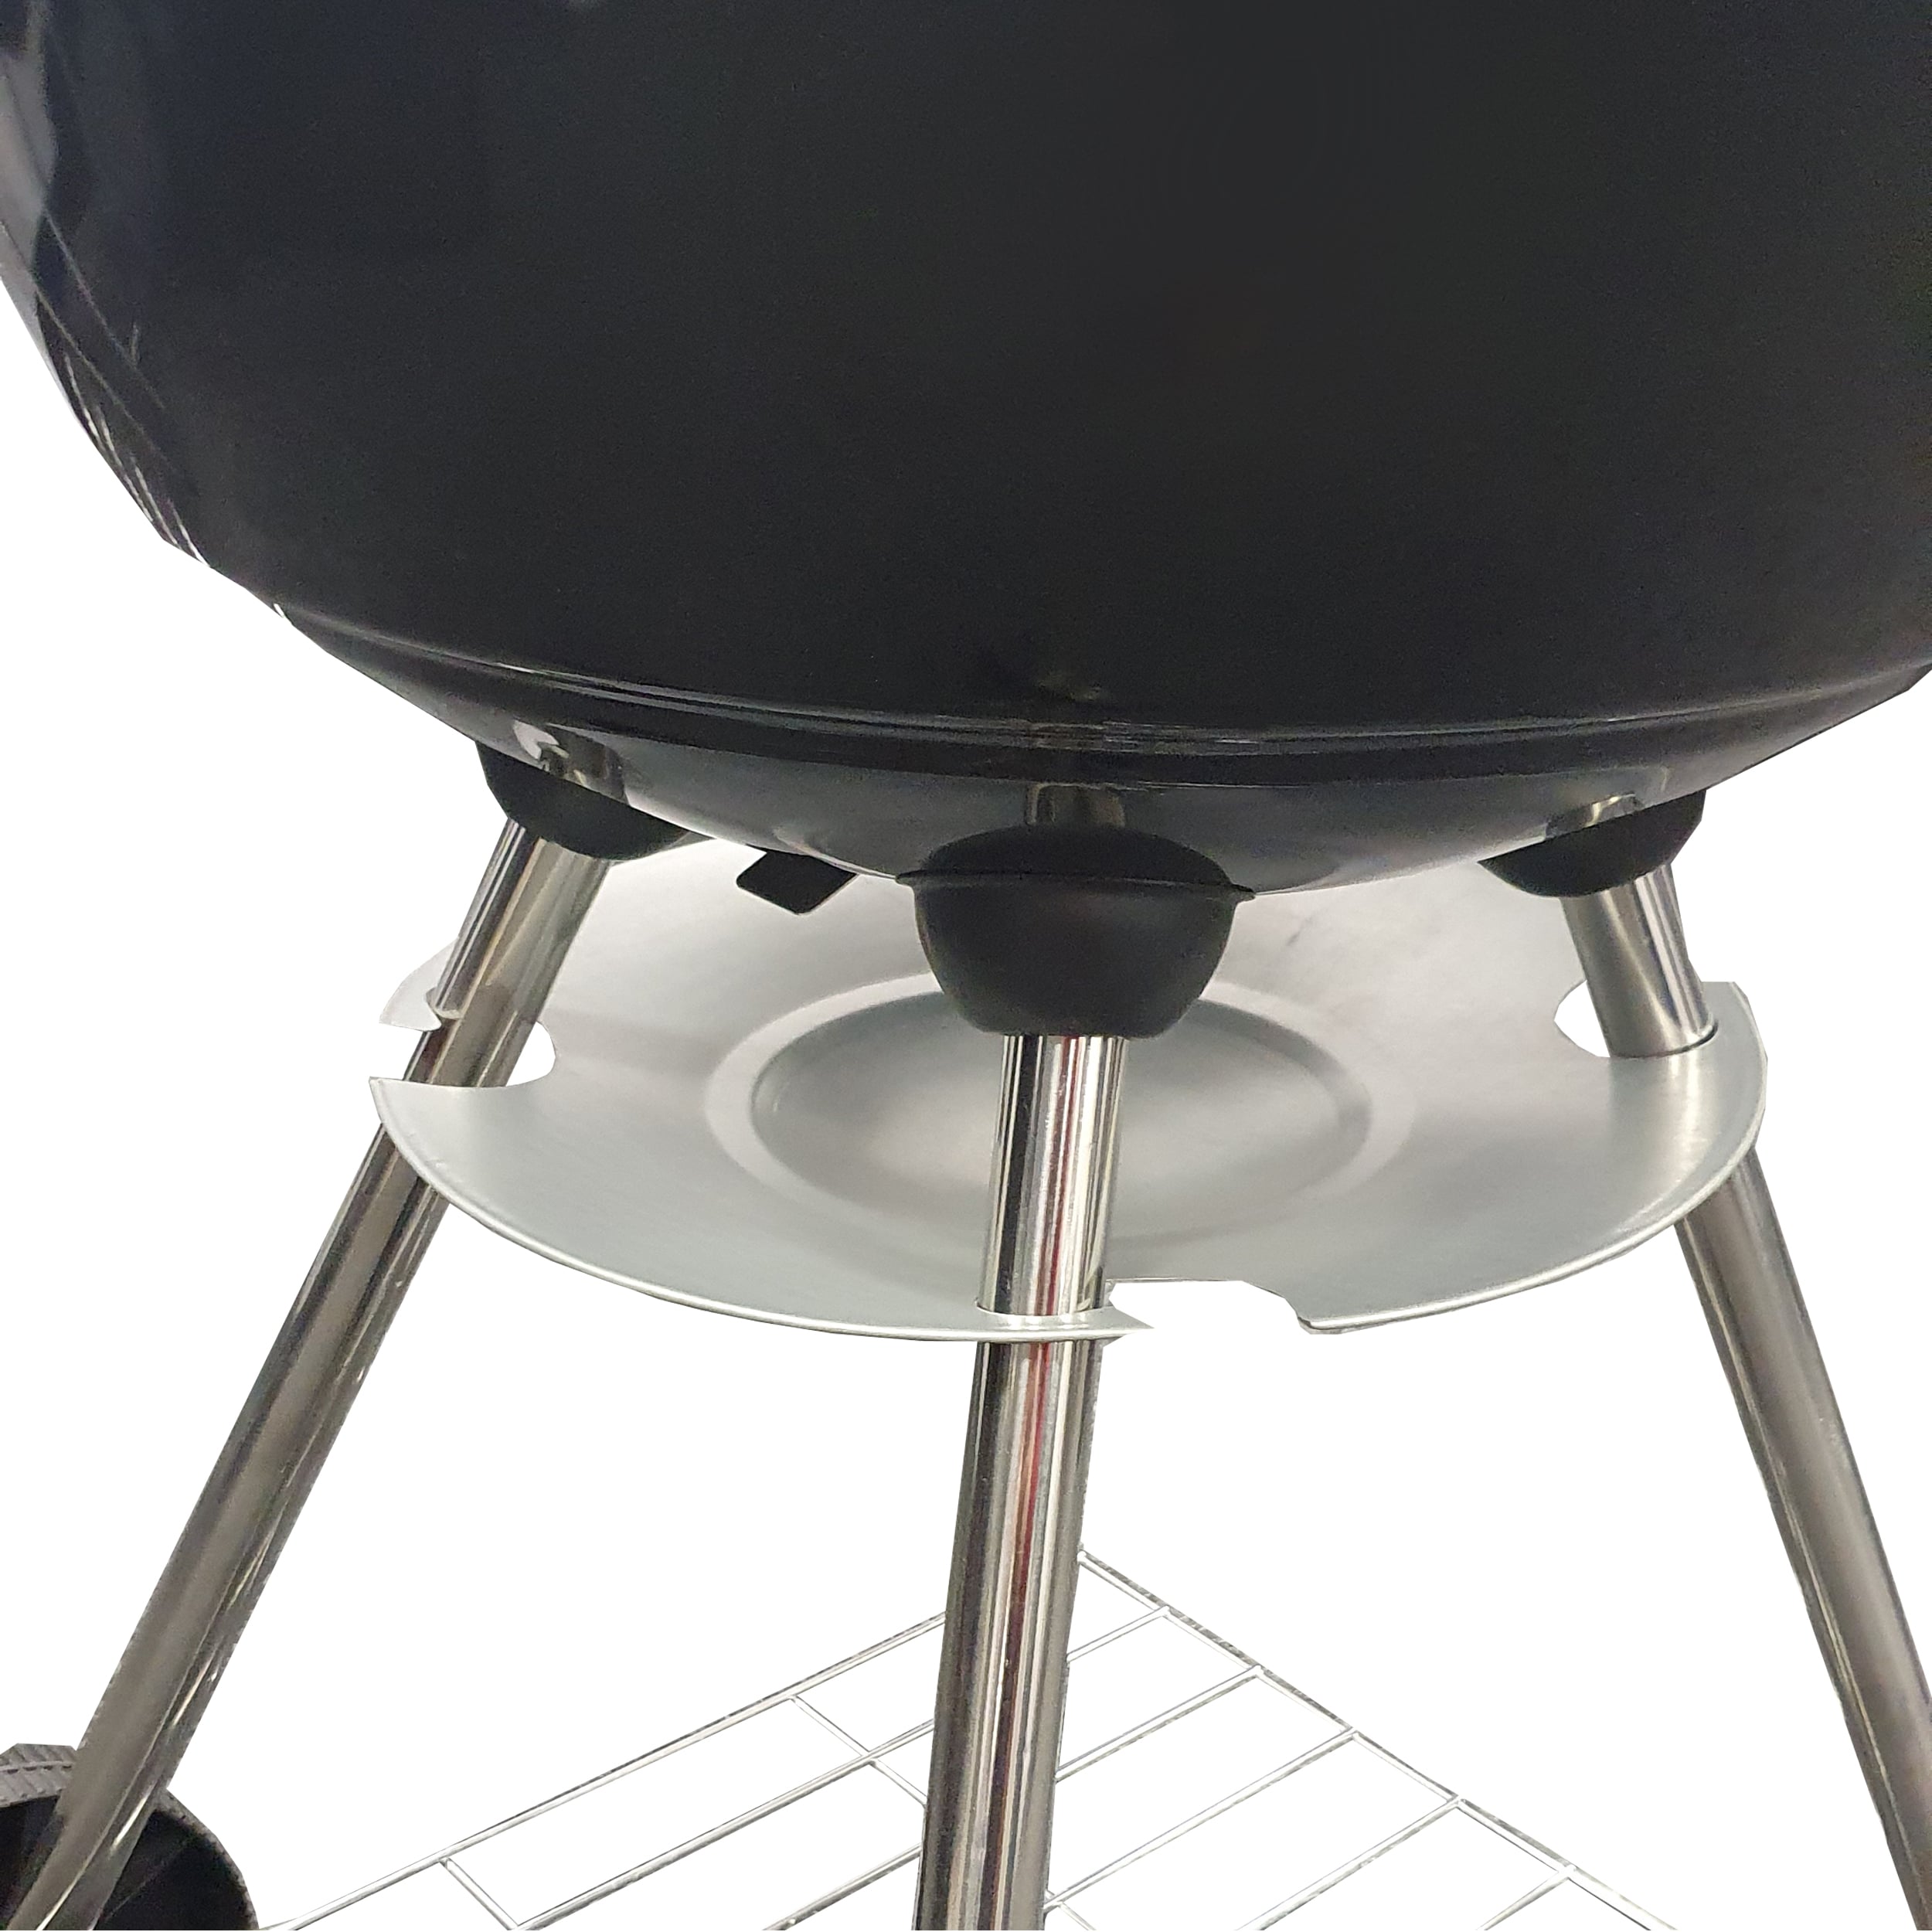 BA0022ALifestyle 22" Kettle Charcoal BBQ